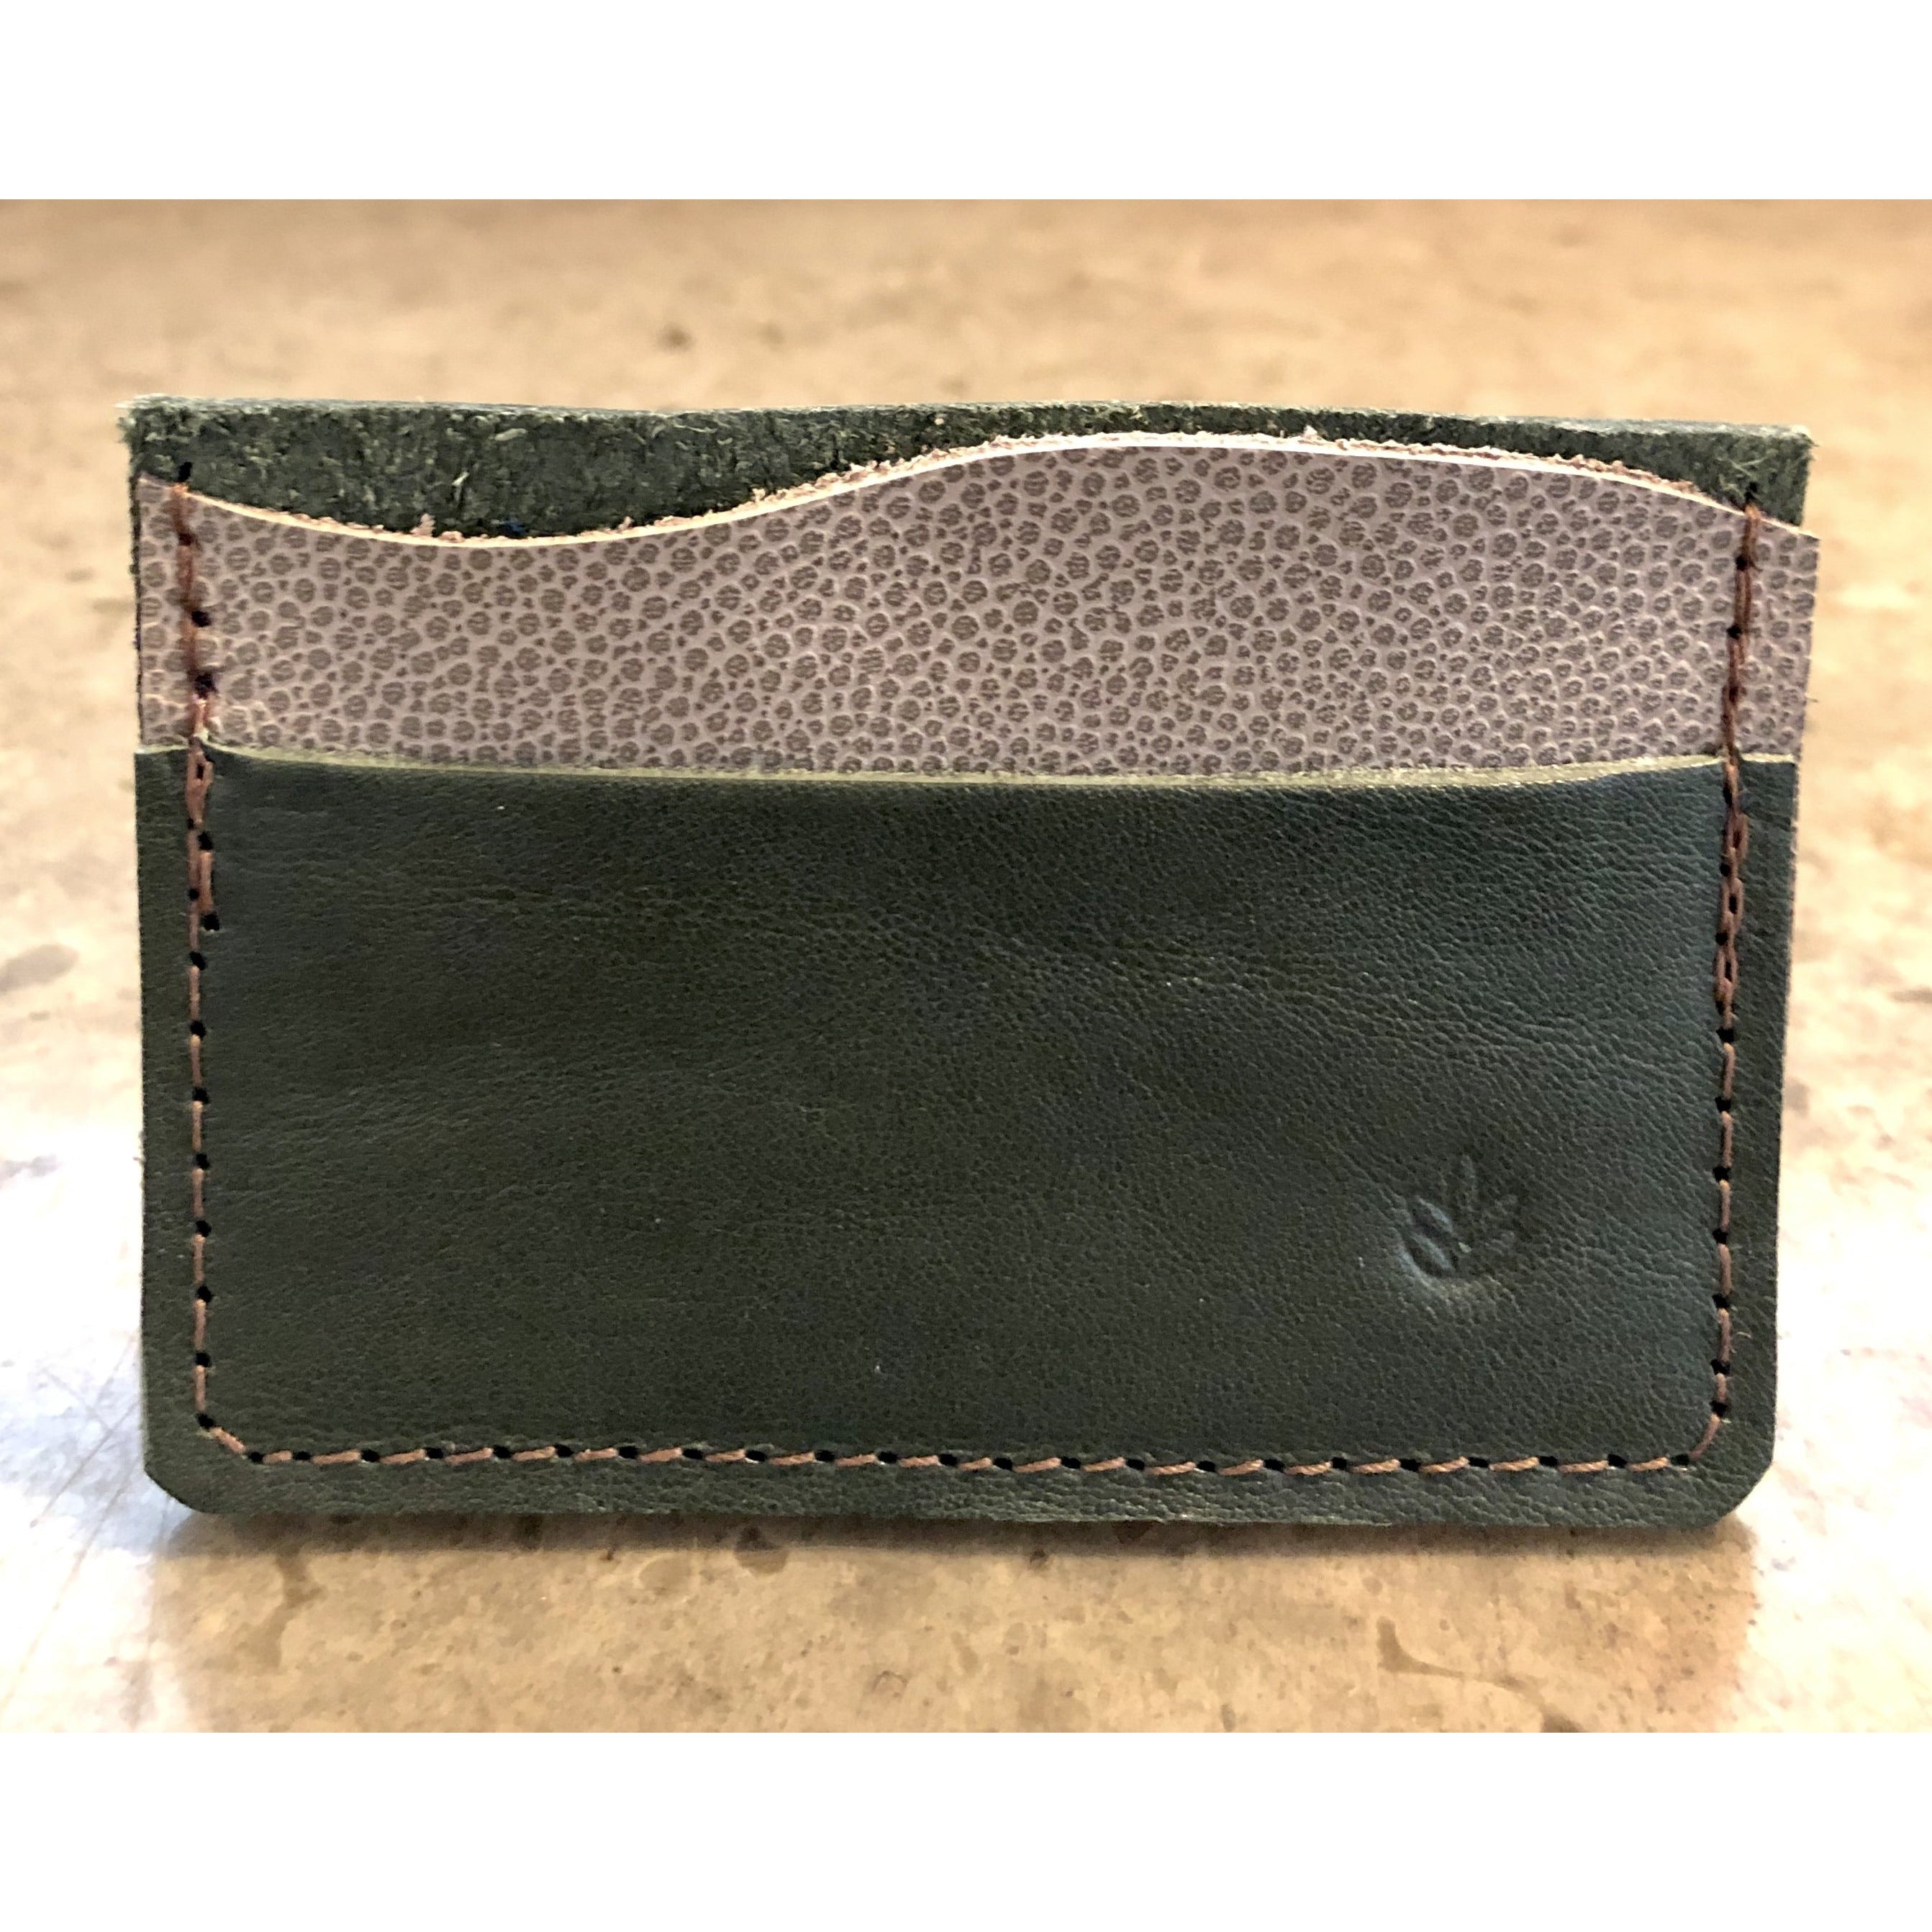 Minimalist 3 Pocket Leather Wallet in forest green and spotted off white